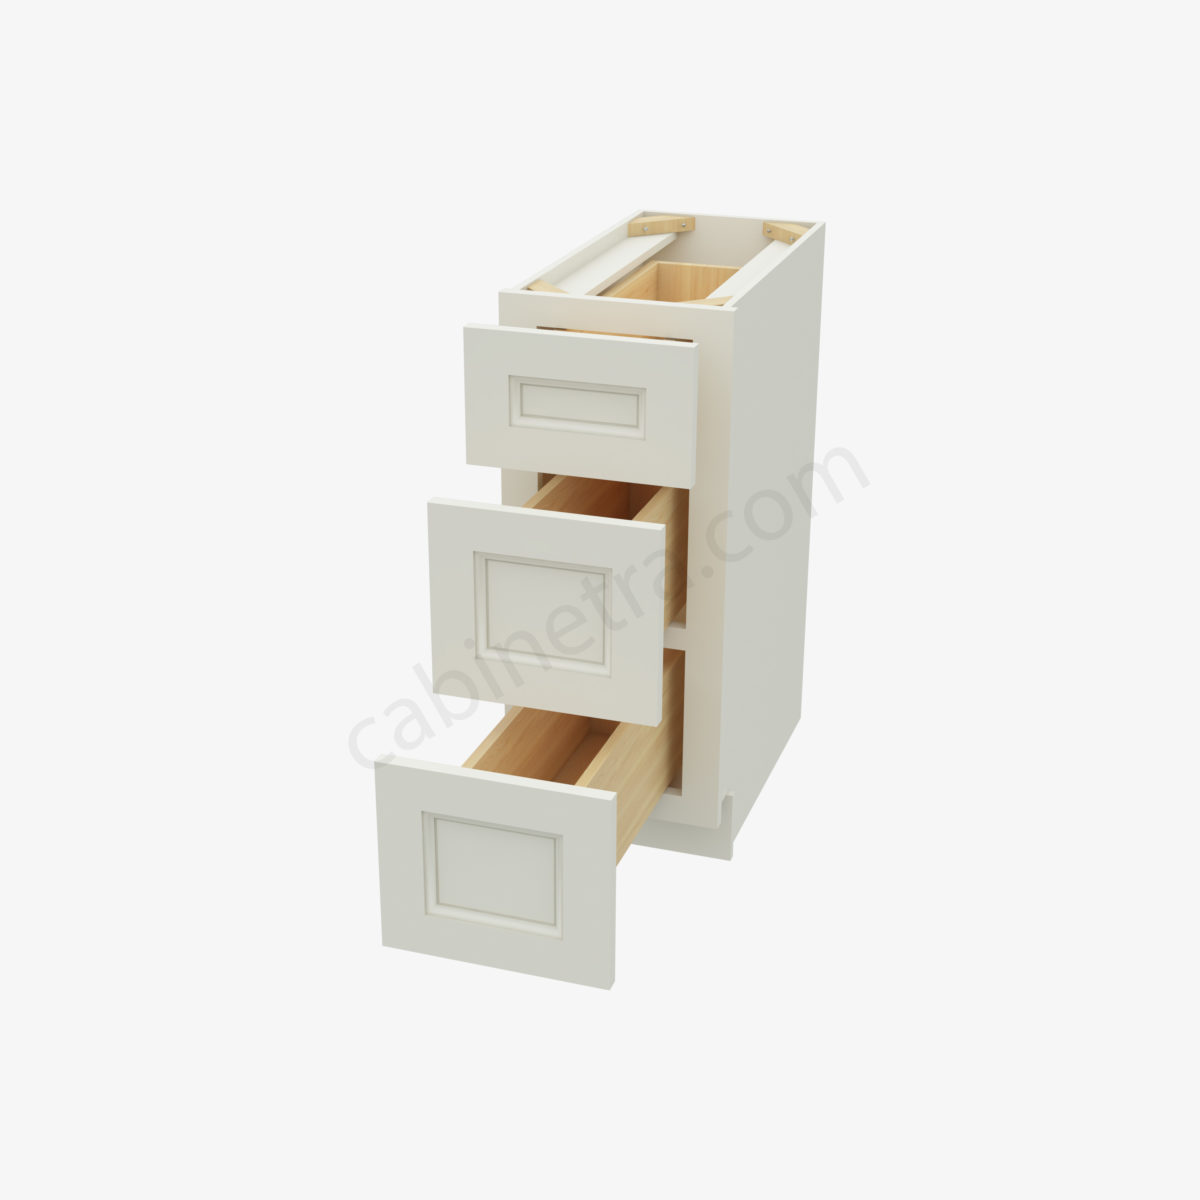 TQ DB12 5 Forevermark Townplace Crema Cabinetra scaled